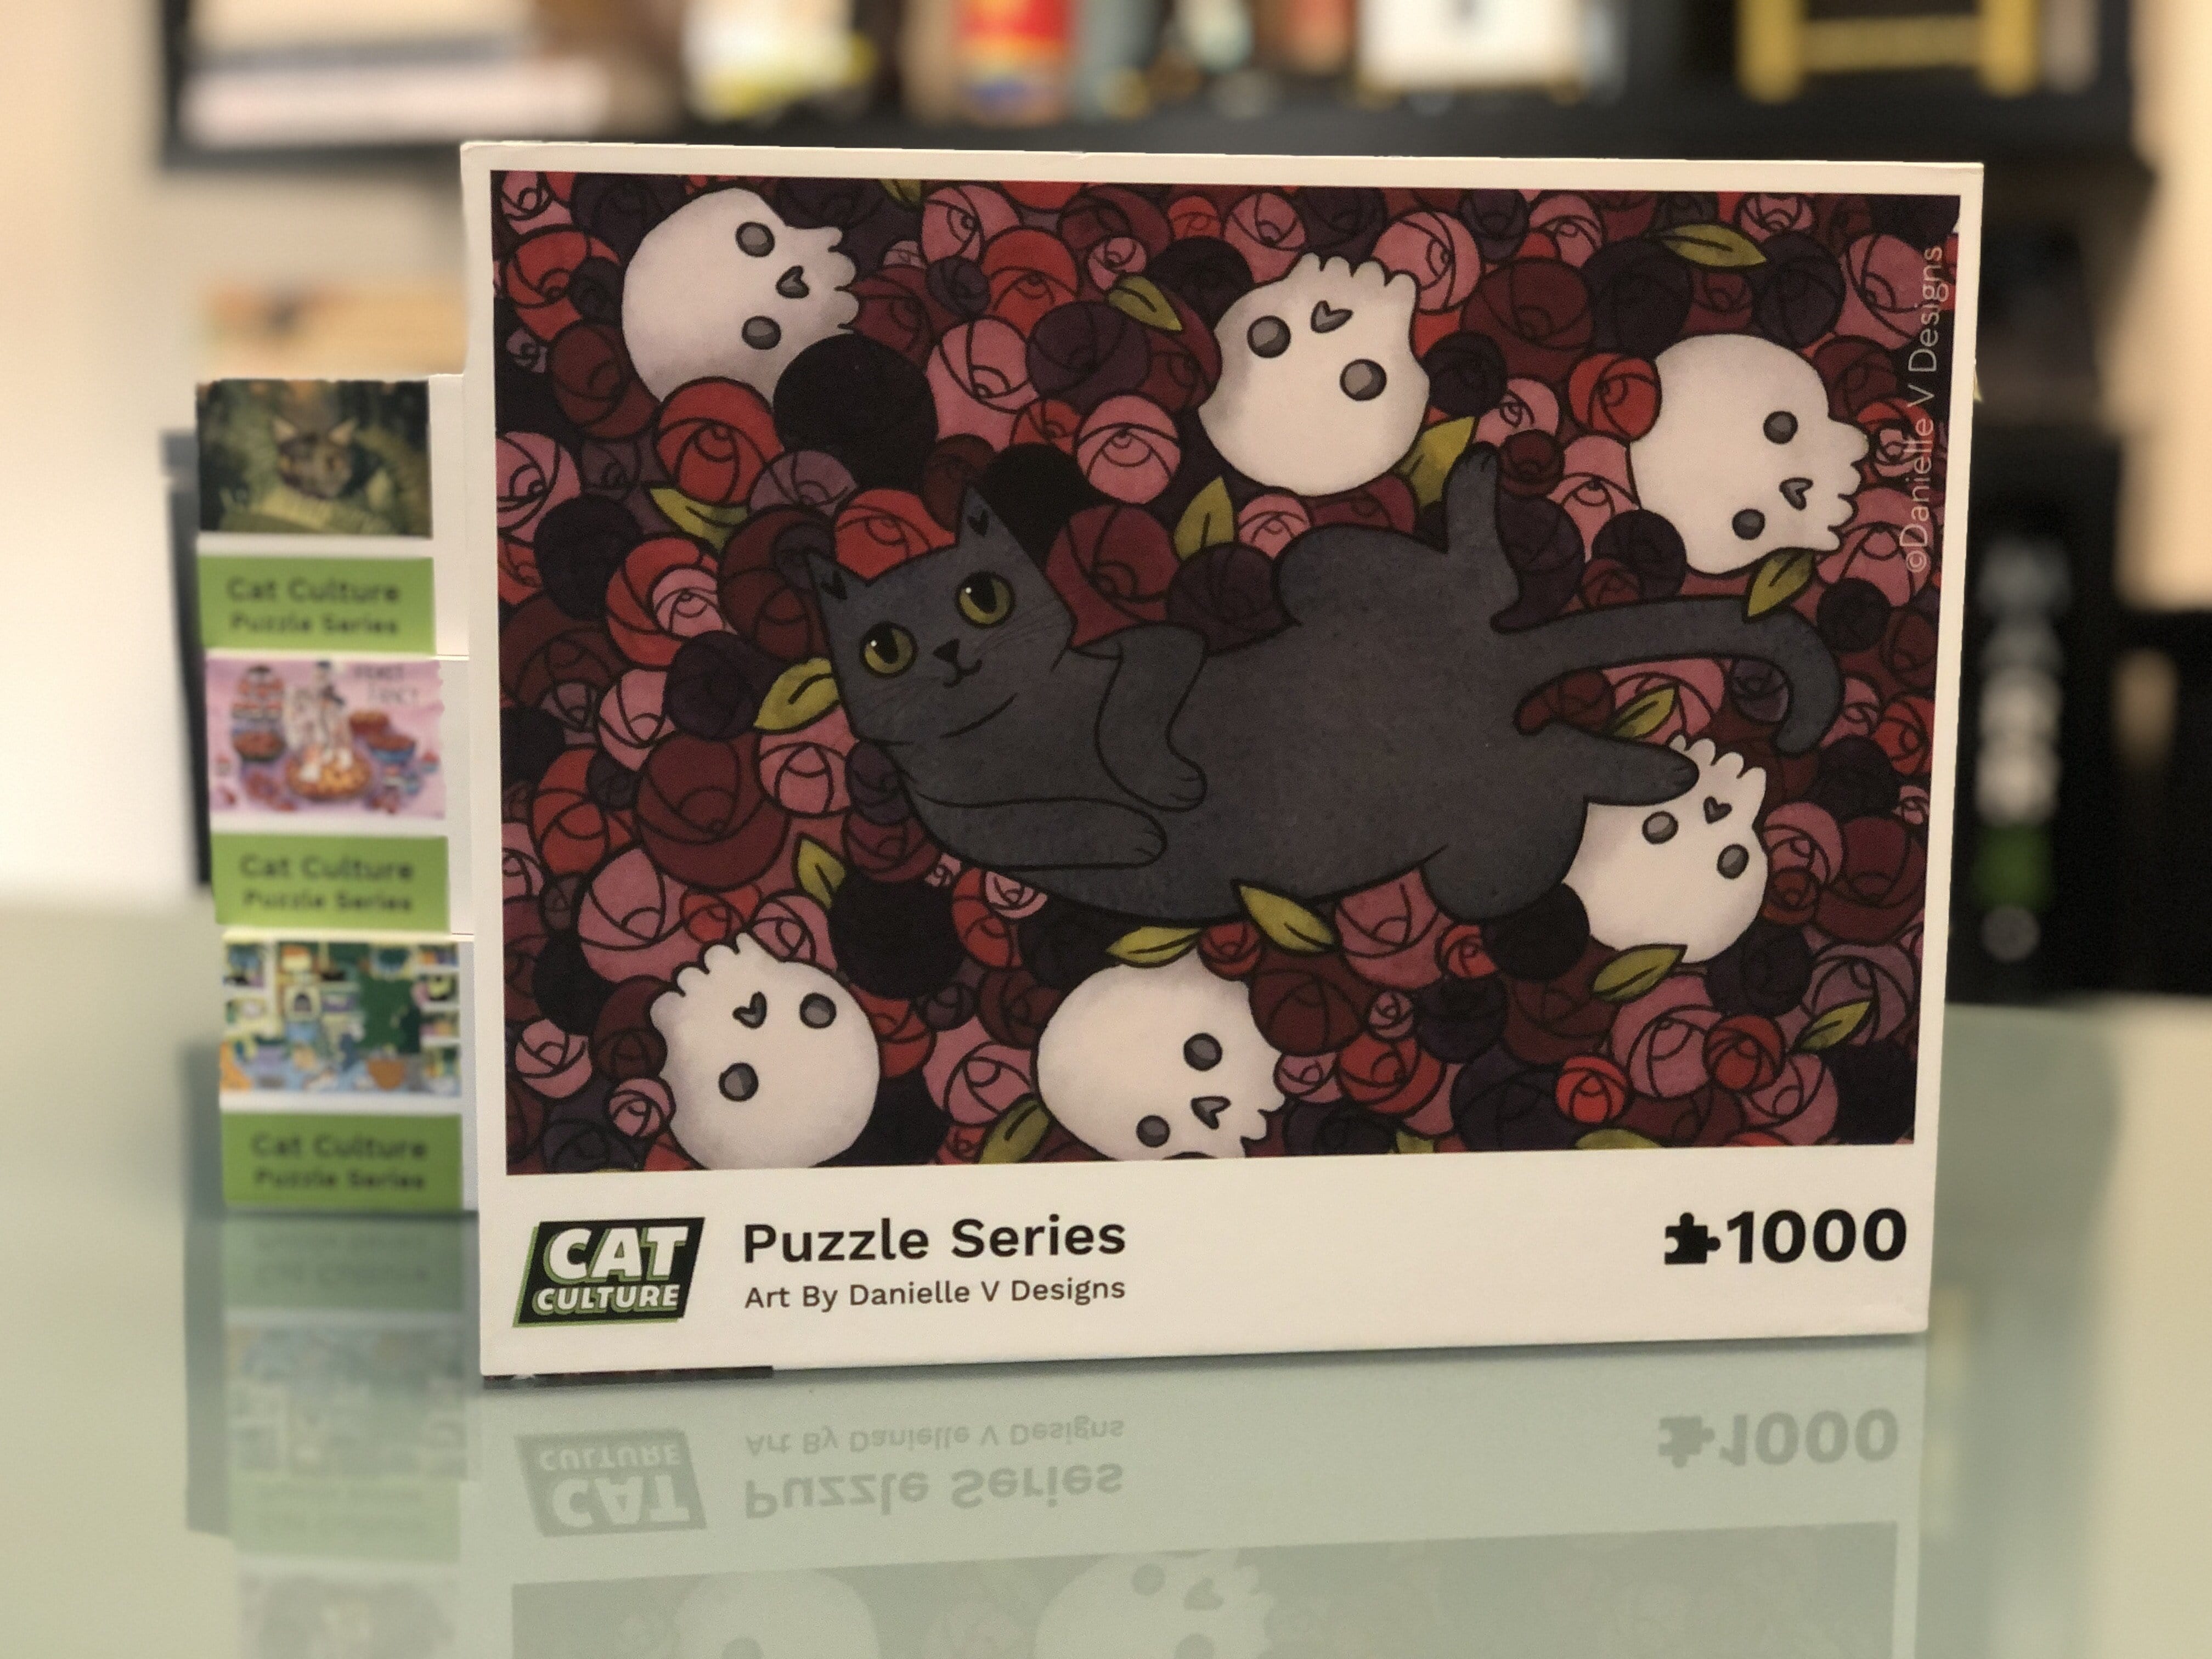 "Hardcore Kitty" by Danielle V. Designs - Cat Culture Artist Series Puzzles